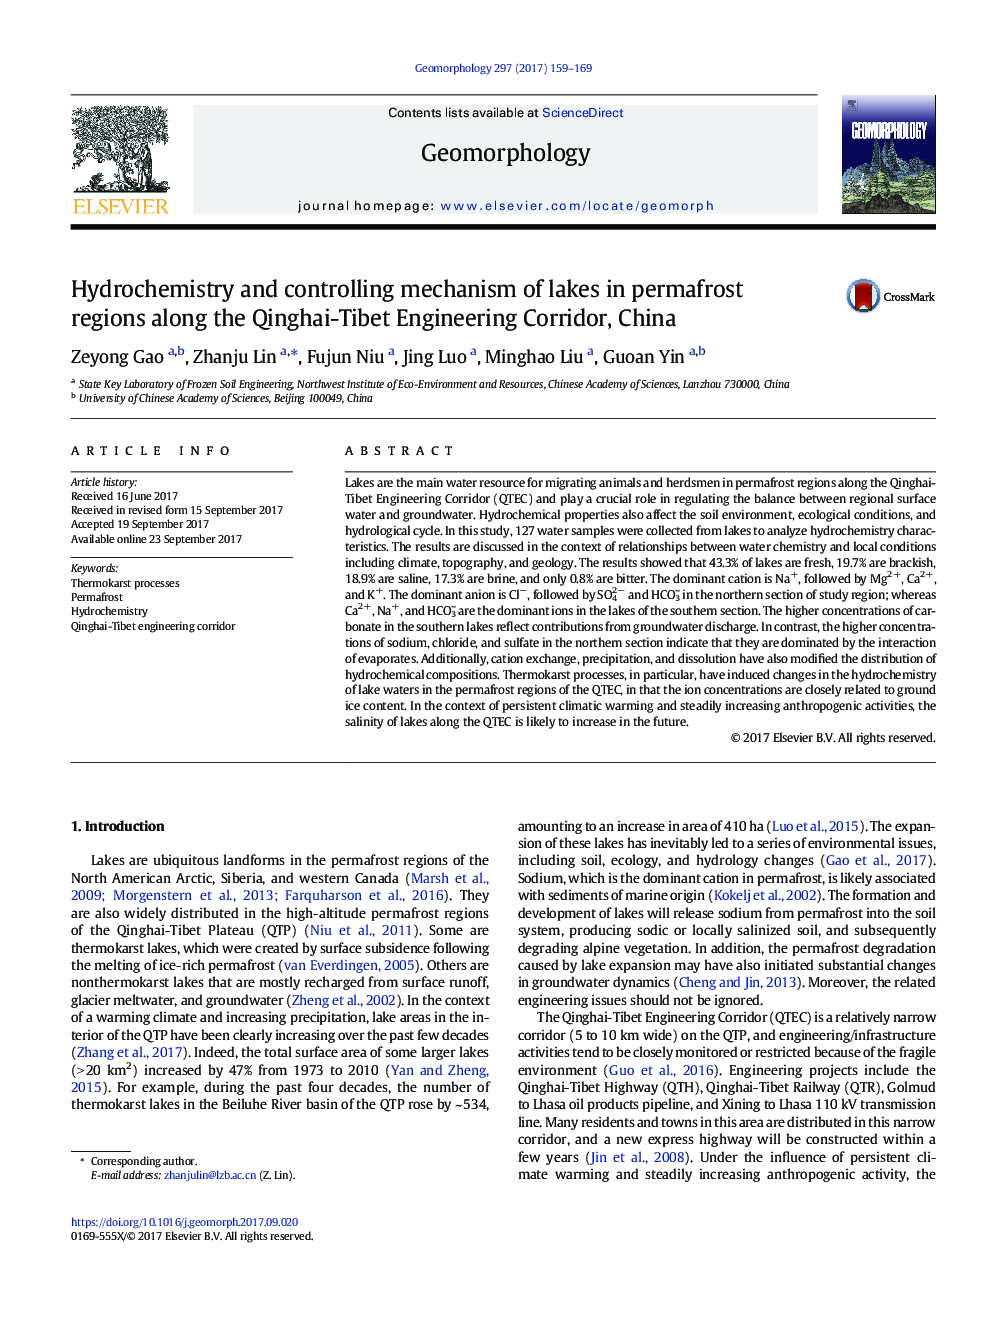 Hydrochemistry and controlling mechanism of lakes in permafrost regions along the Qinghai-Tibet Engineering Corridor, China